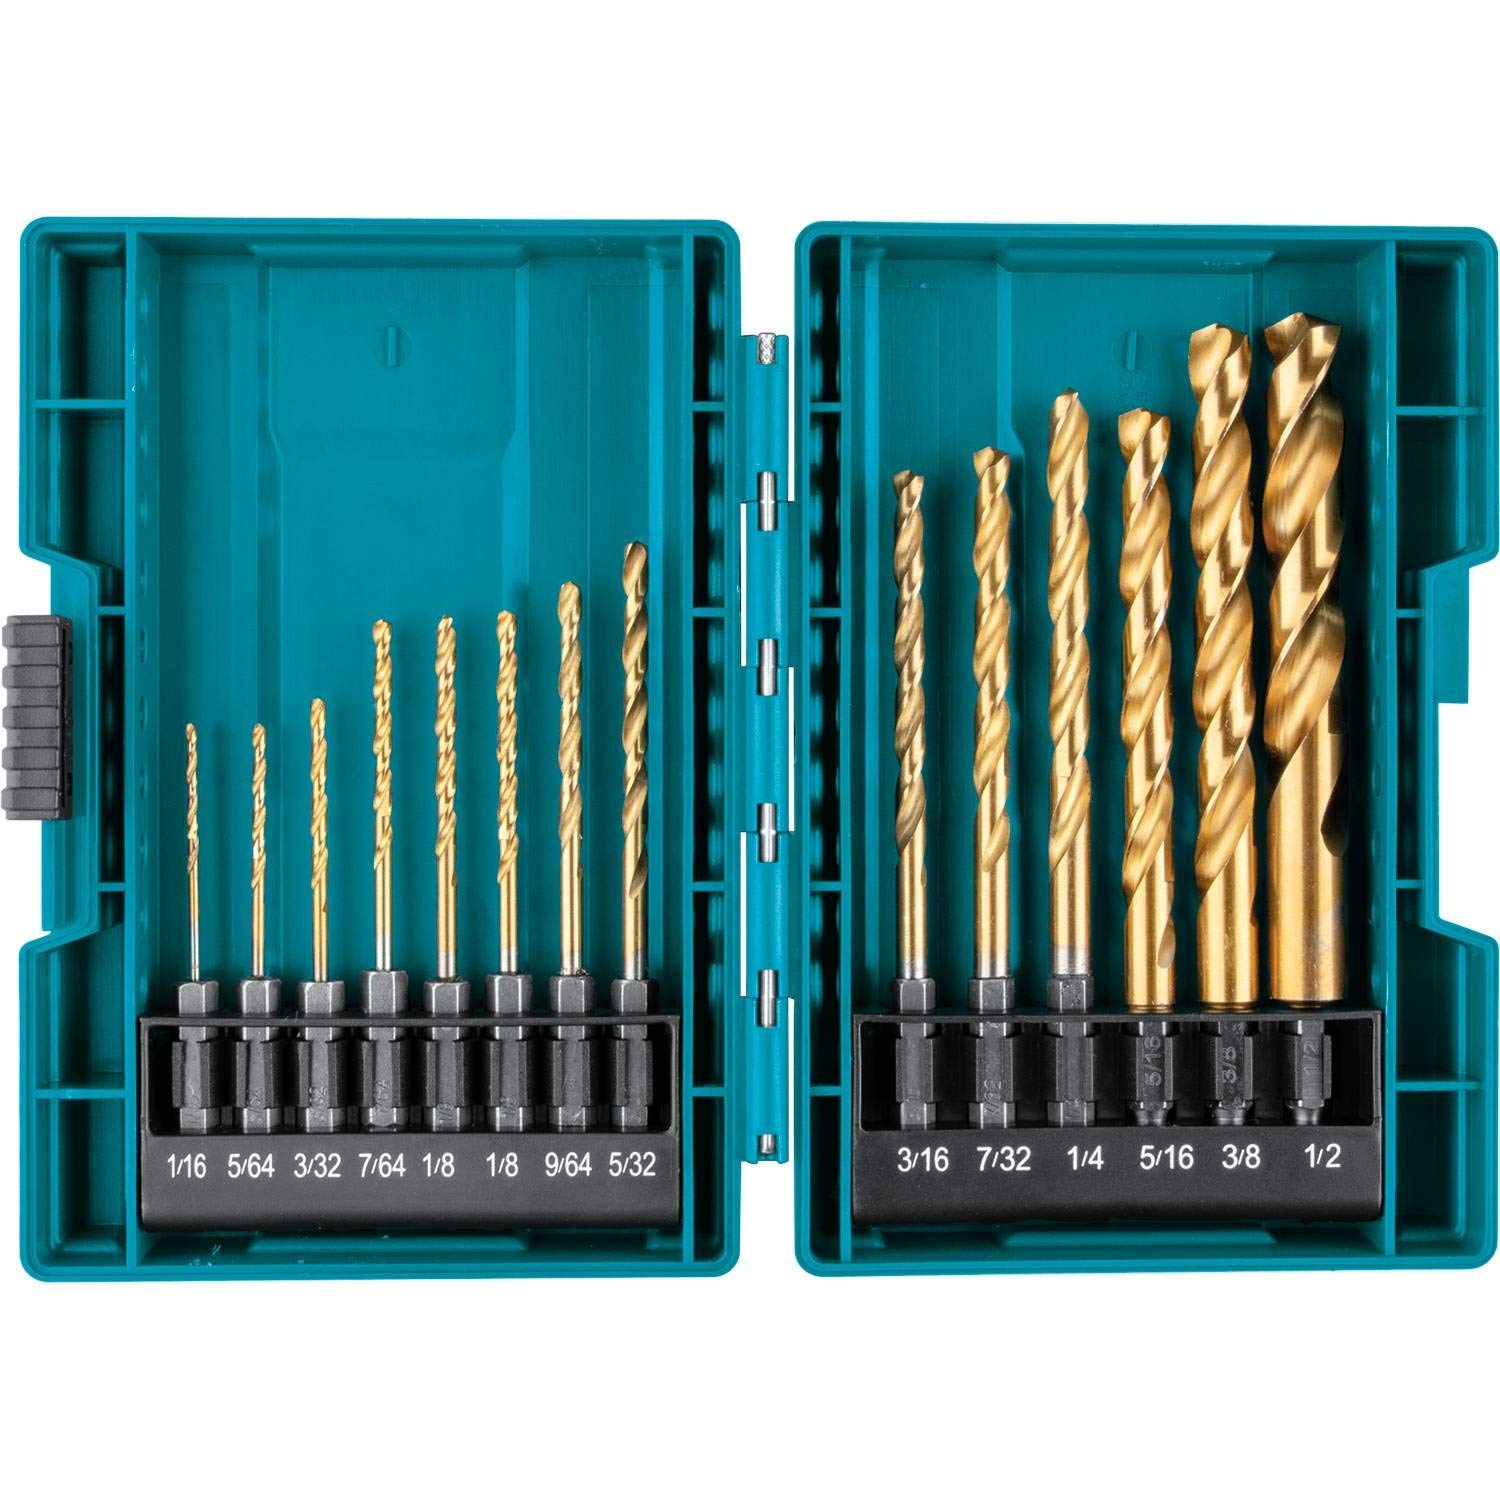 Makita B-65399 Impact Gold 14 Pc. Titanium Coating Drill Bit Set, 1/4 In. Hex Shank $11 + Free Shipping w/ Prime or on $35+